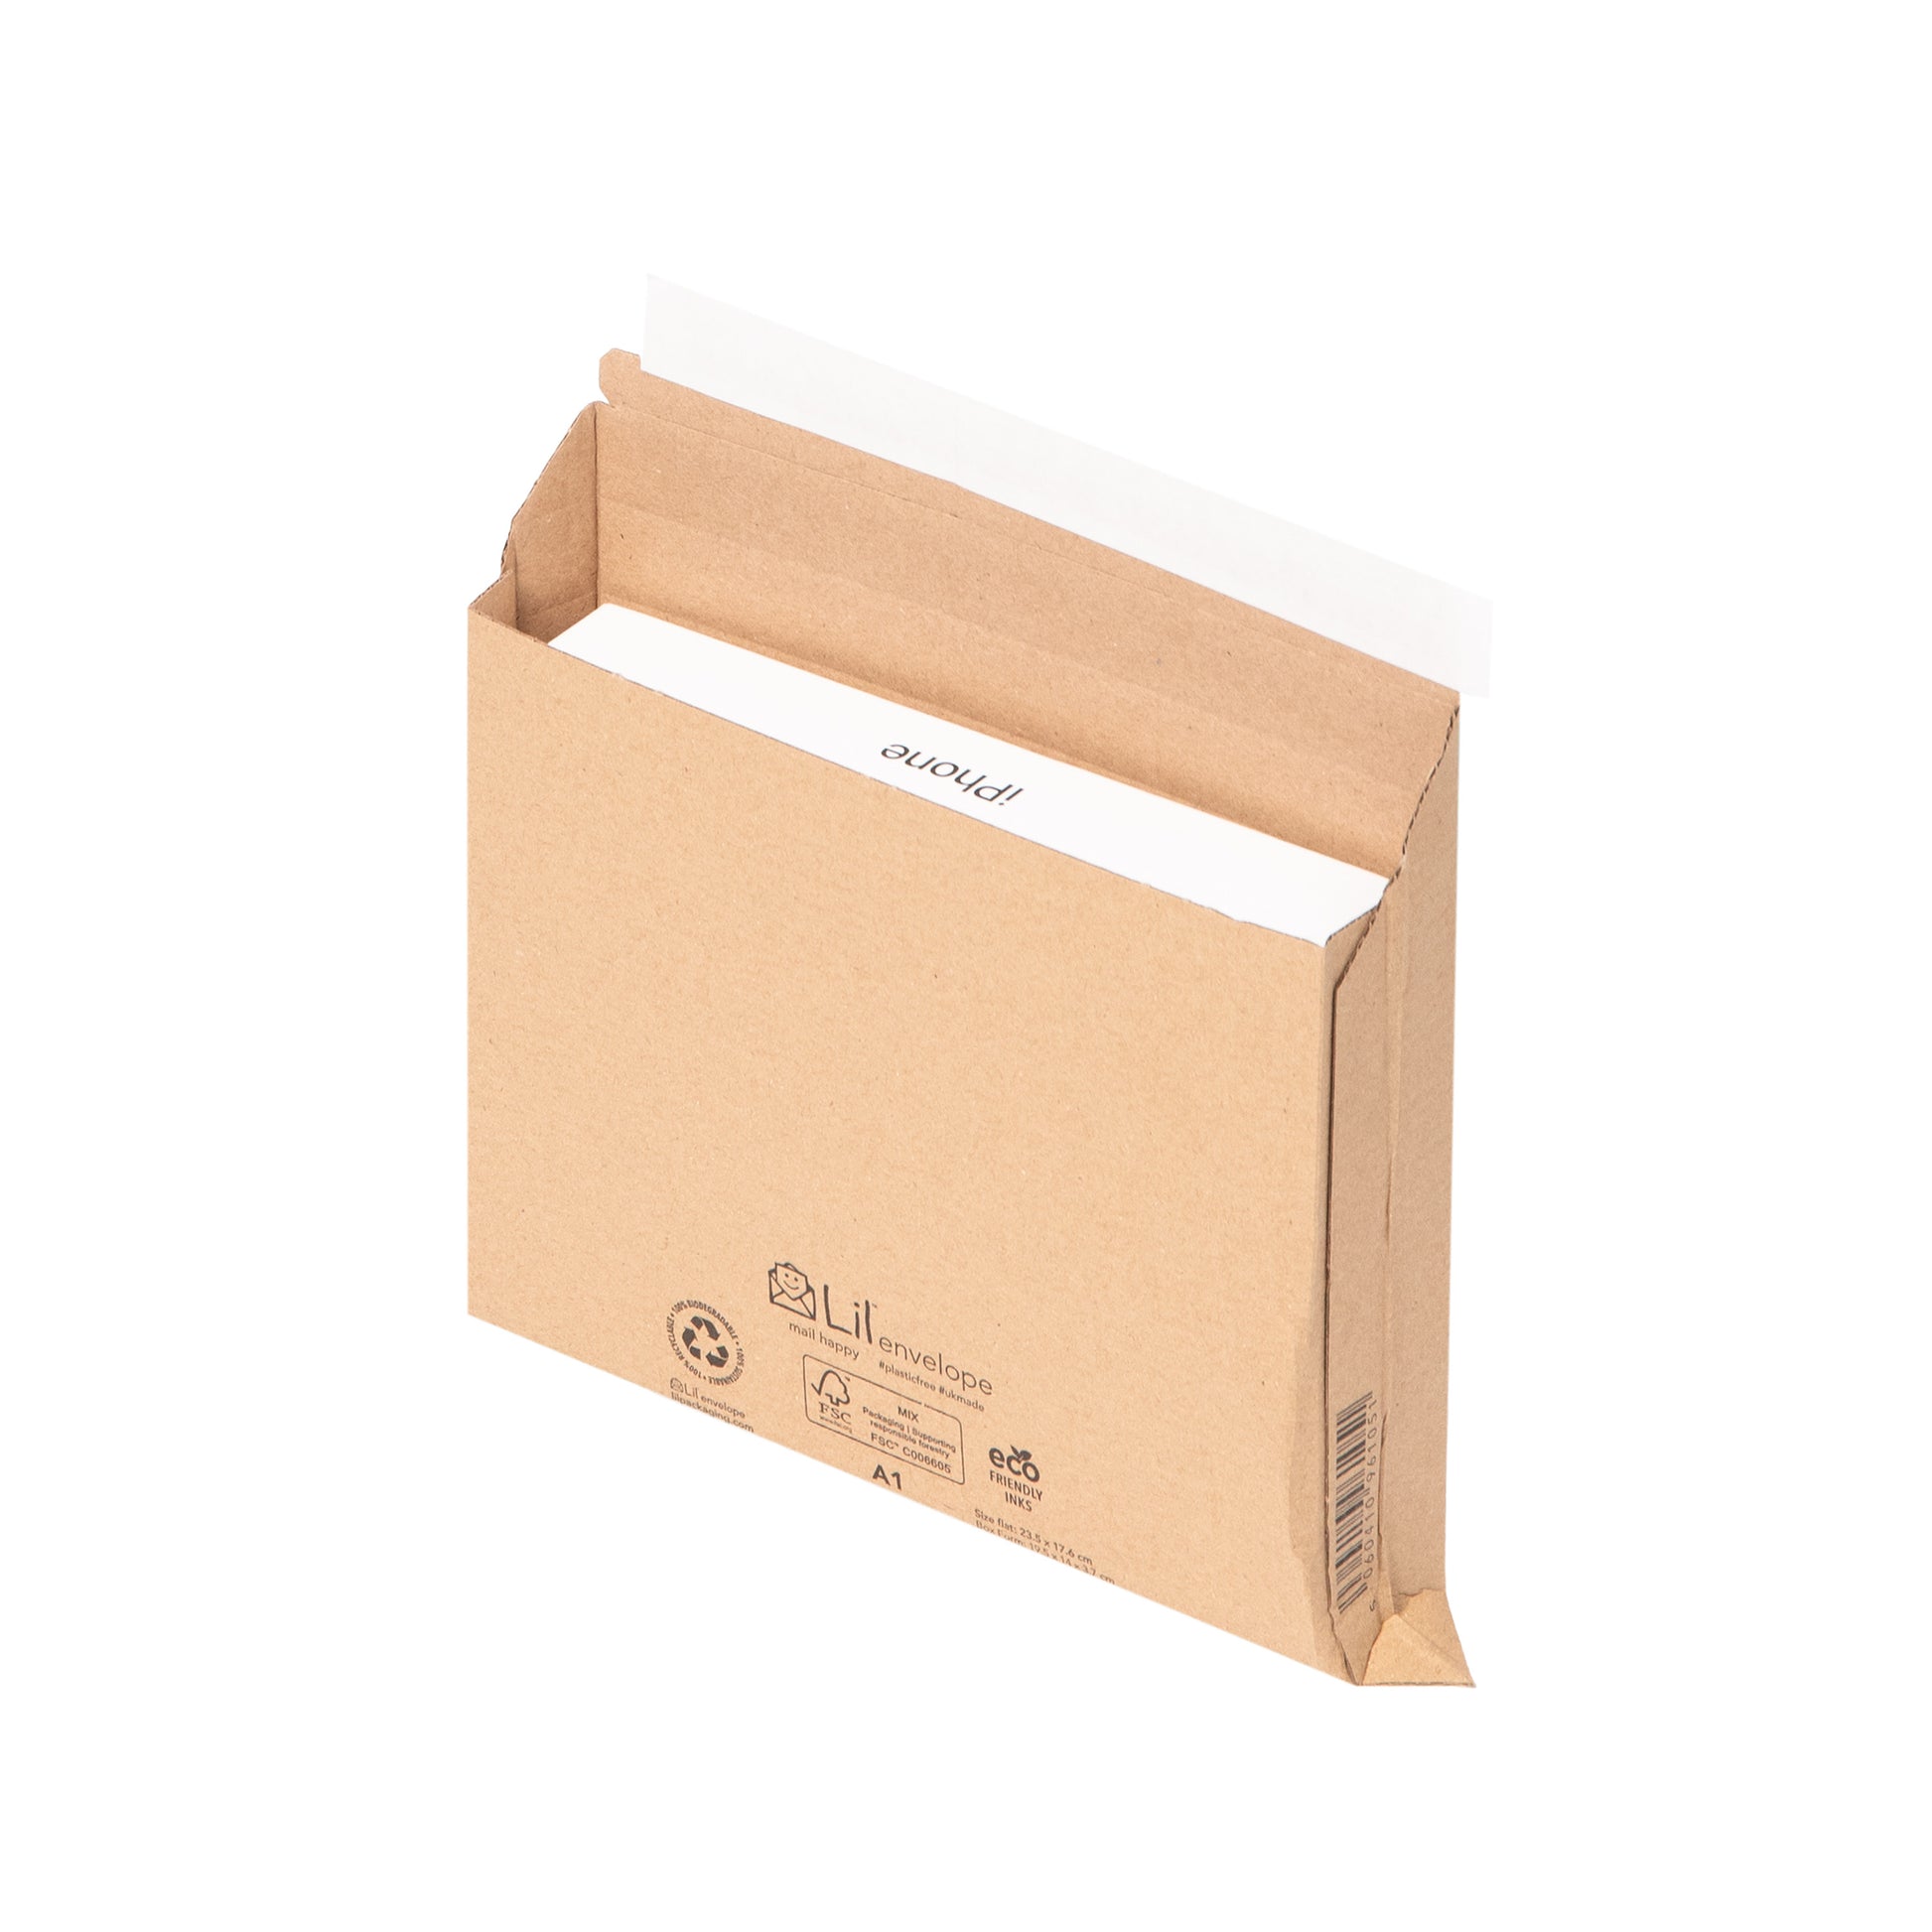 A1 DVD/A5 size mailer | Lil Packaging